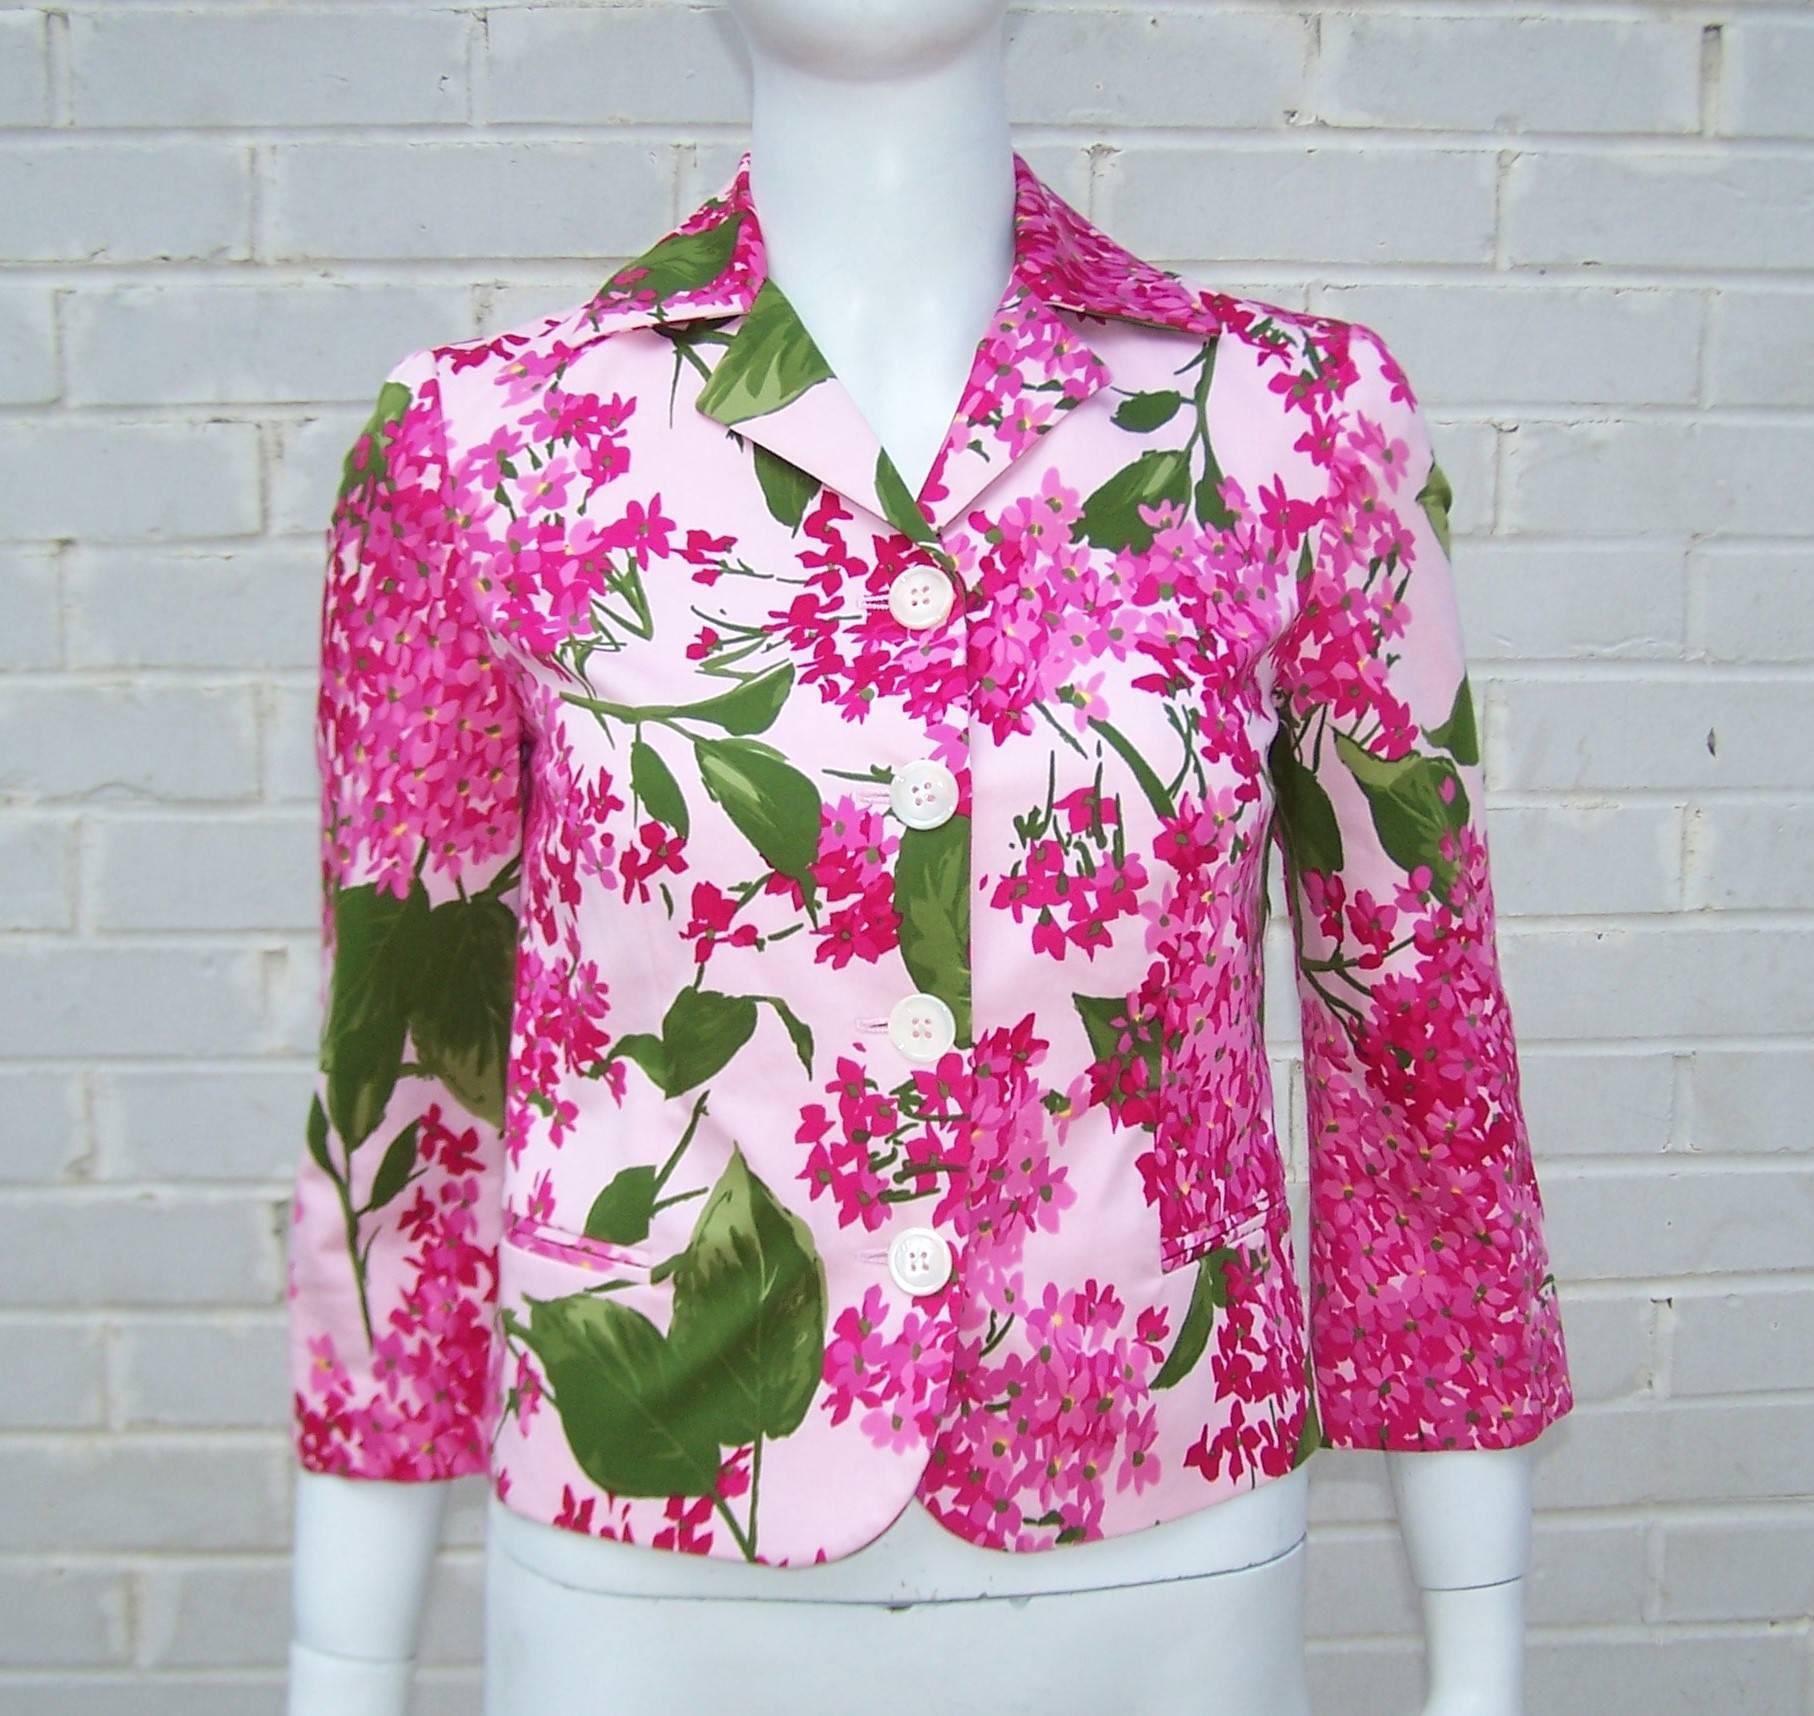 Franco Moschino has created an adorable 'Cheap And Chic' jacket with all the color and crispness of a beautiful Spring day.  The polished cotton fabric depicts hydrangeas in pinks and fuchsia colors accented with two tones of green and a touch of